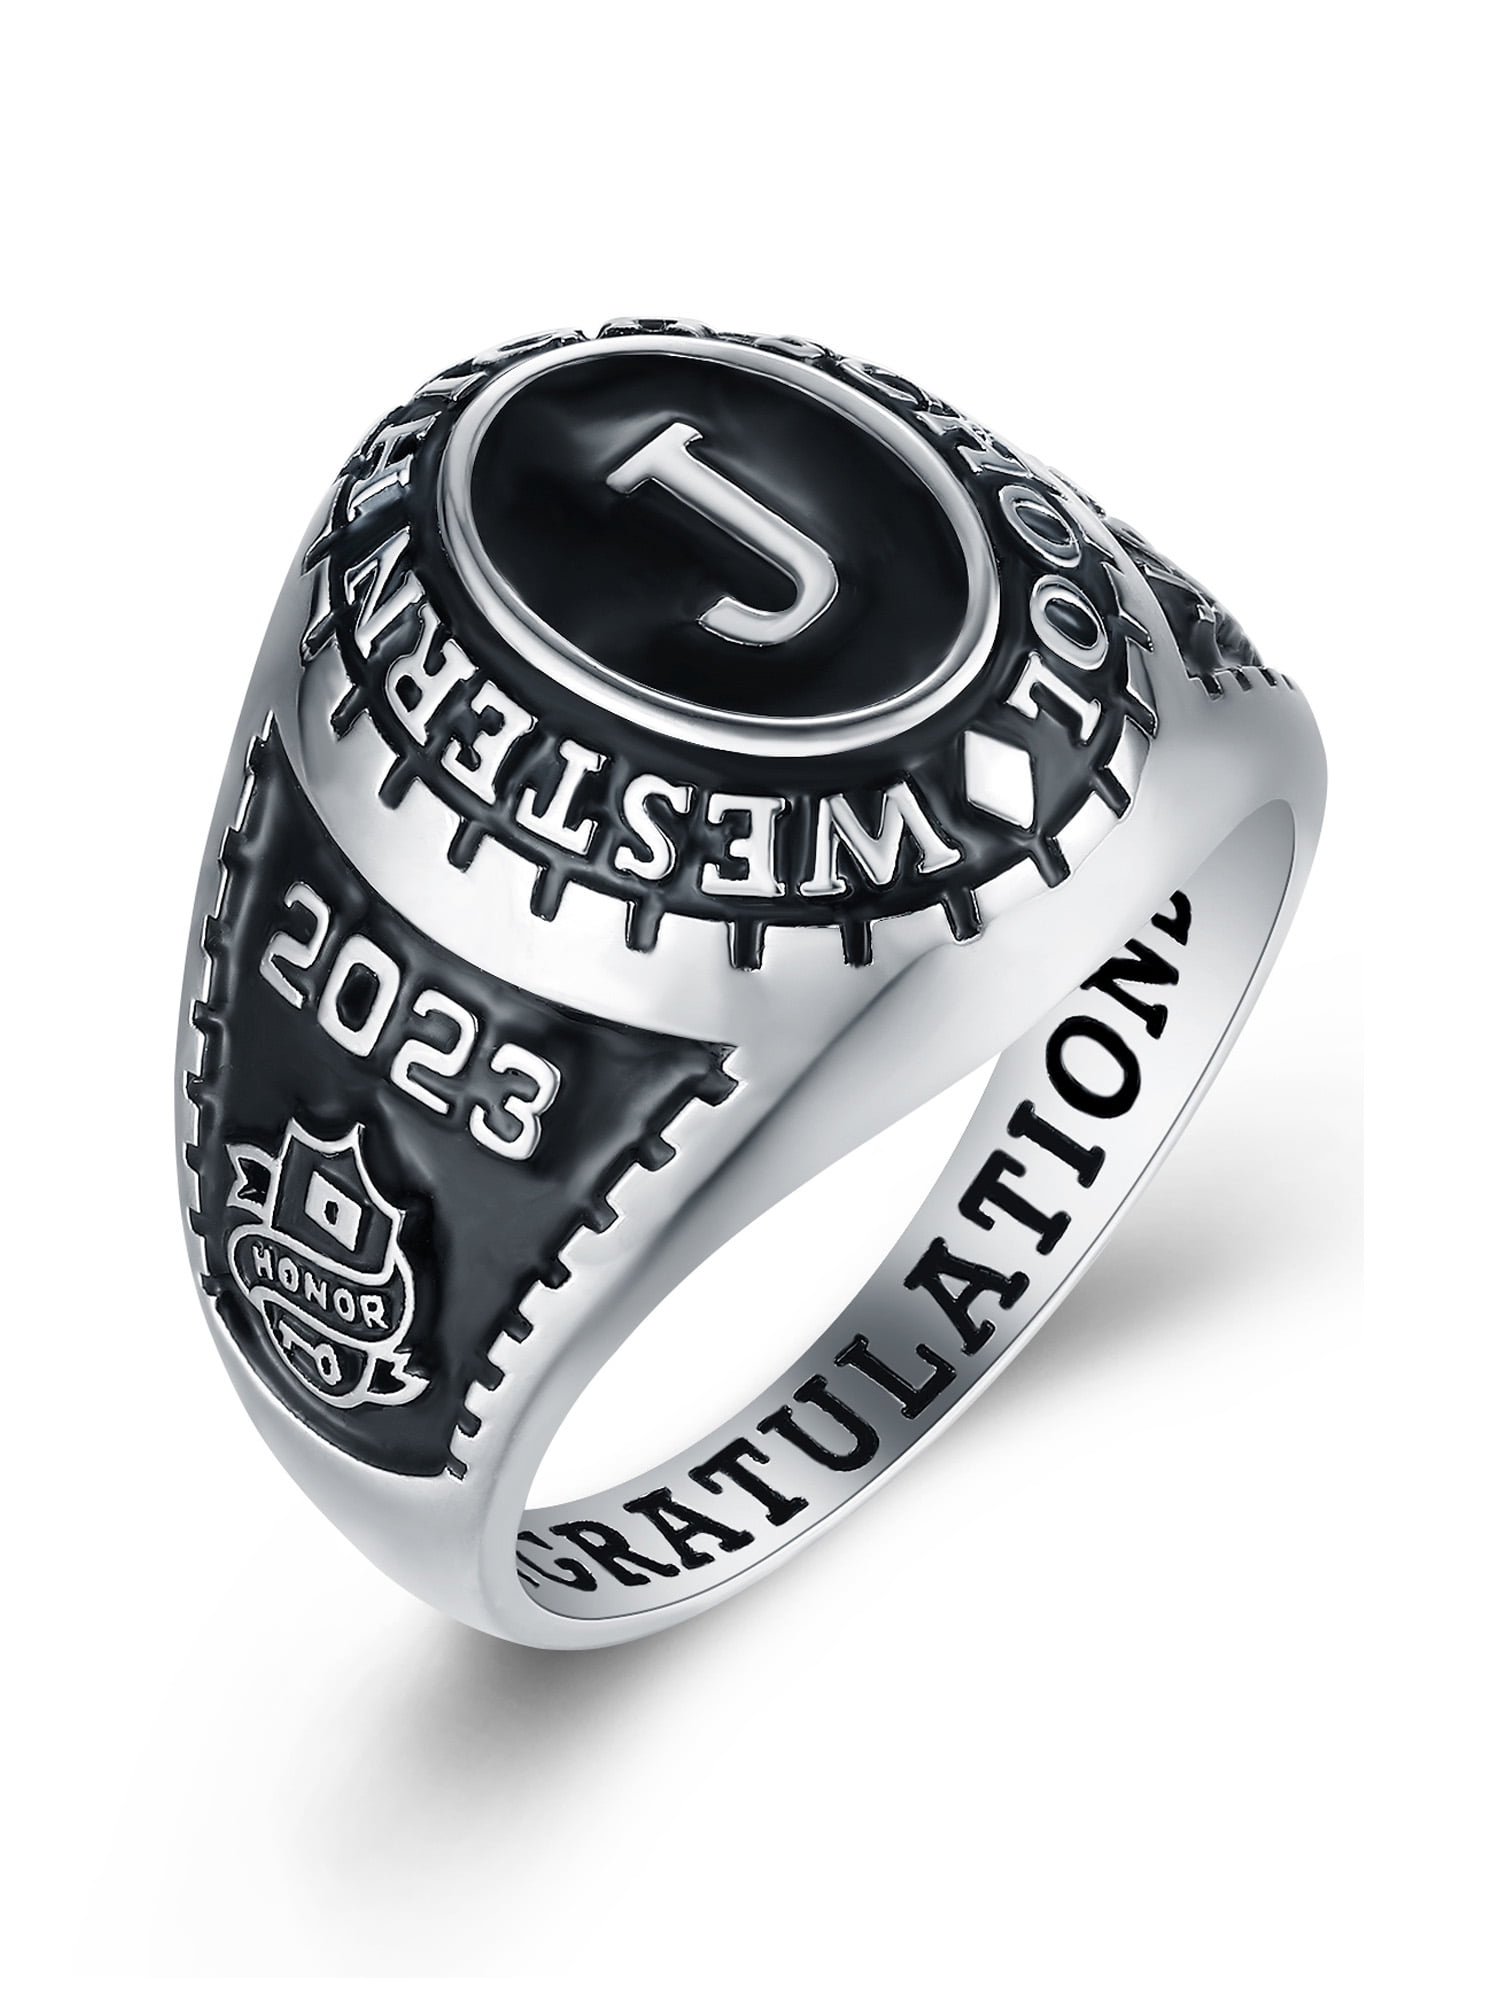 Affordable High School and College Class Rings for Guys and Girls